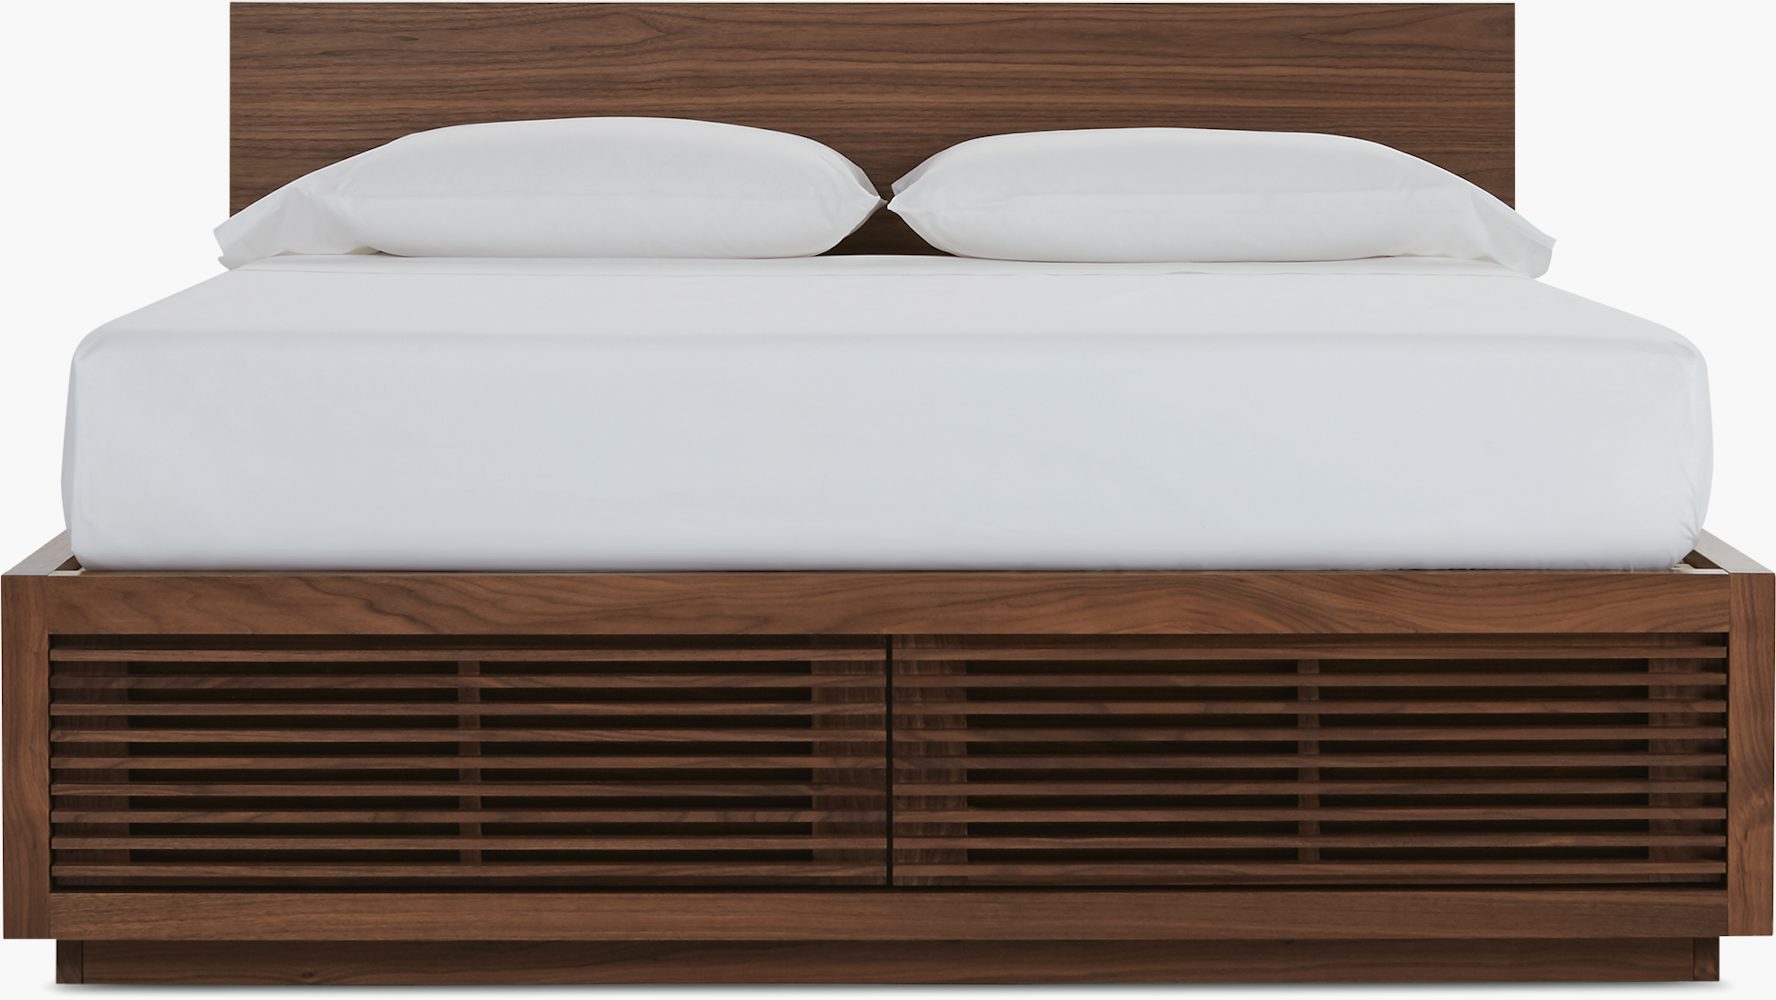 rots geef de bloem water Pijl Line Storage Bed Outlet – Design Within Reach